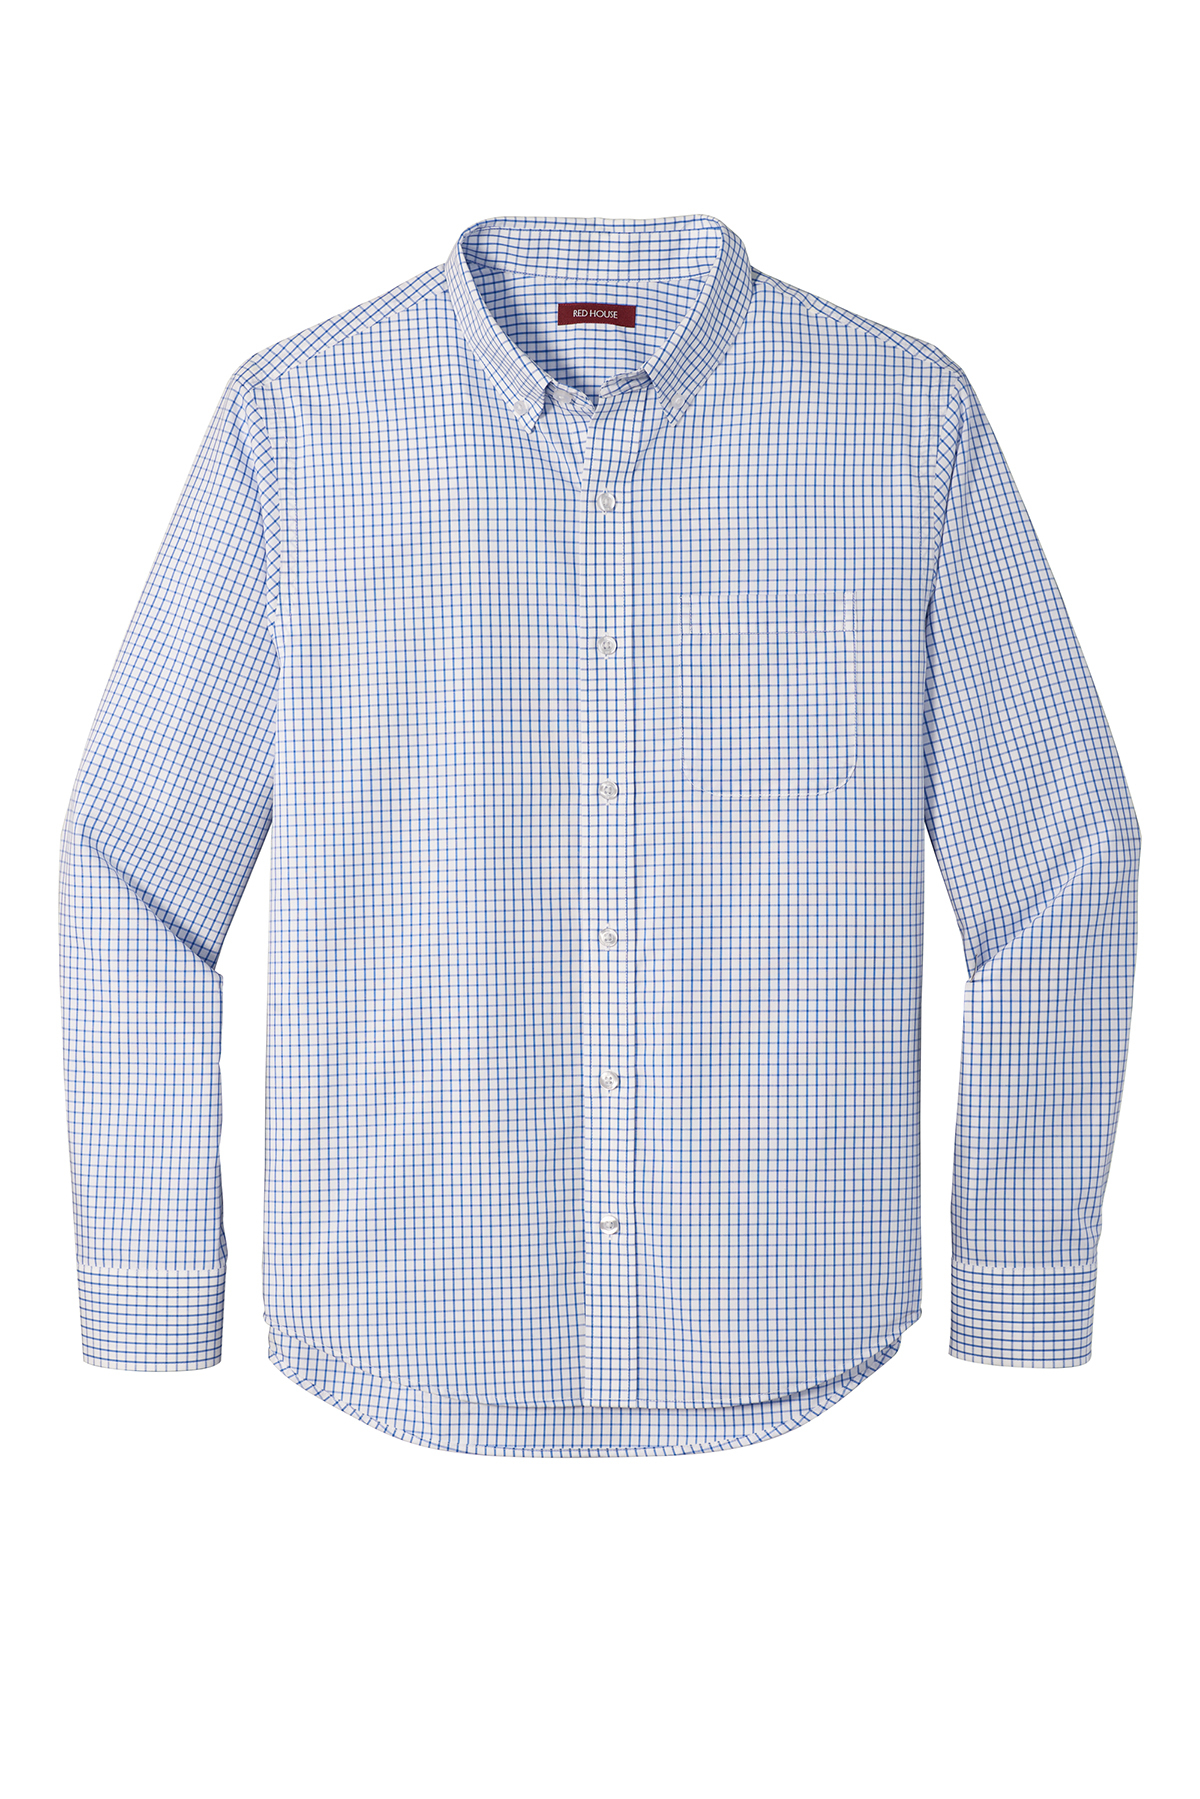 Red House RH85 - Open Ground Check Non-Iron Shirt